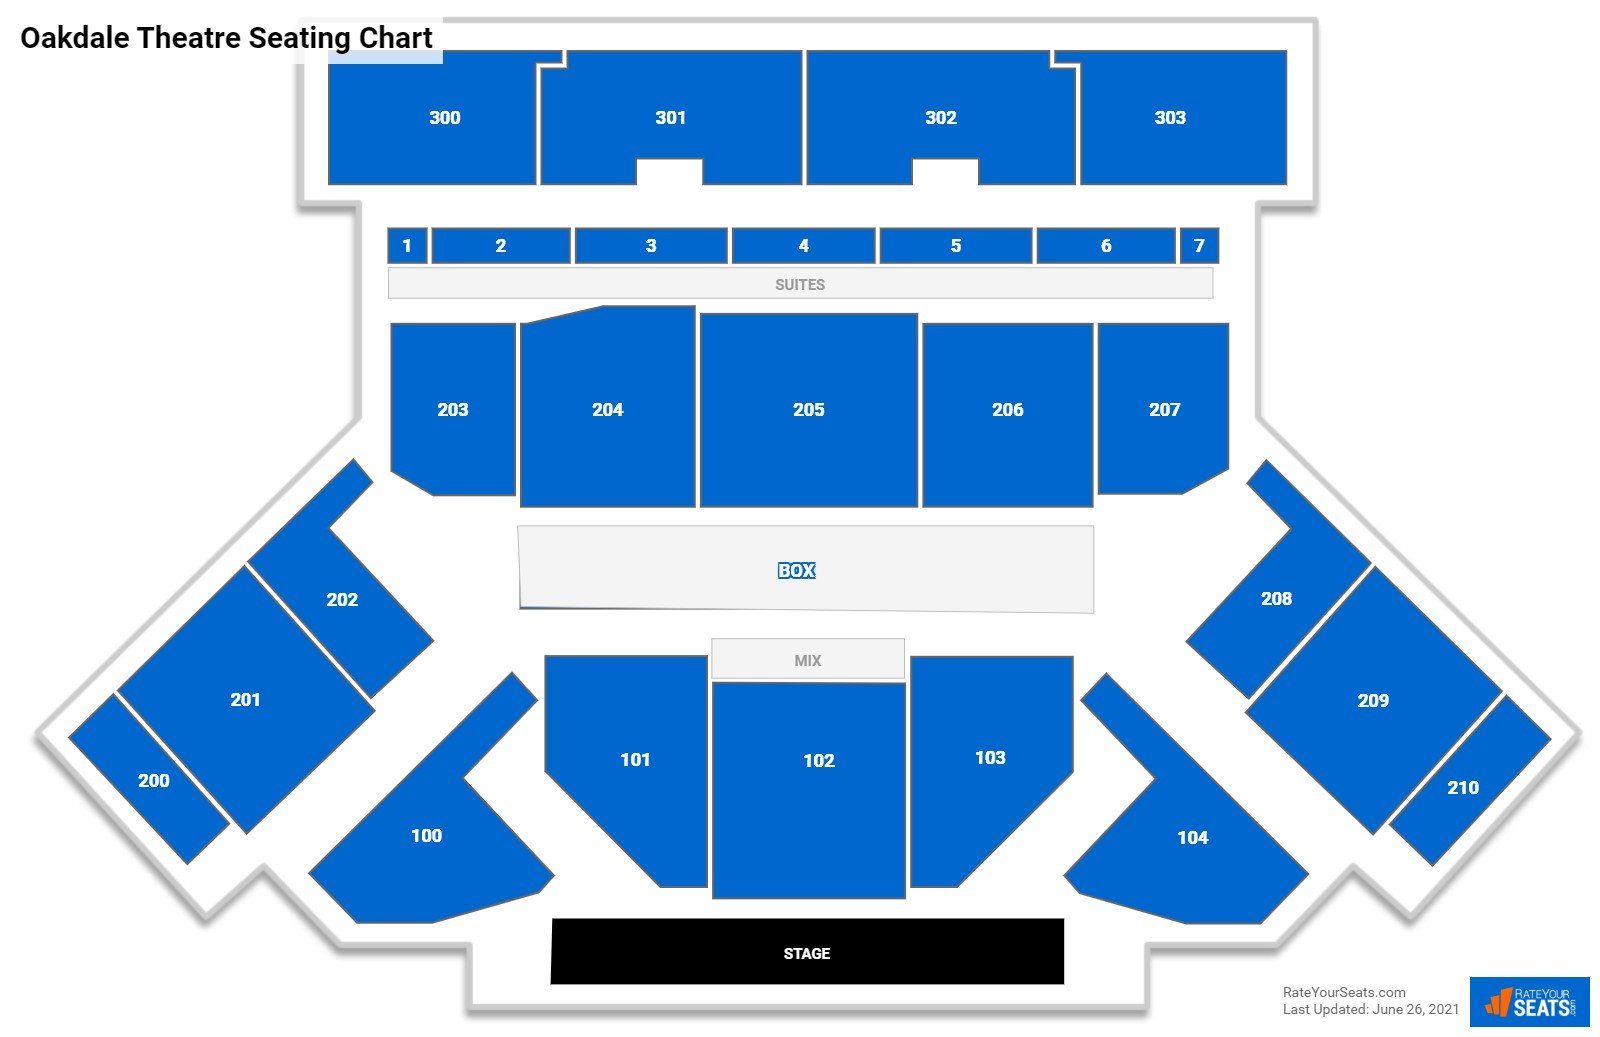 Oakdale Theatre Concert Seating Chart